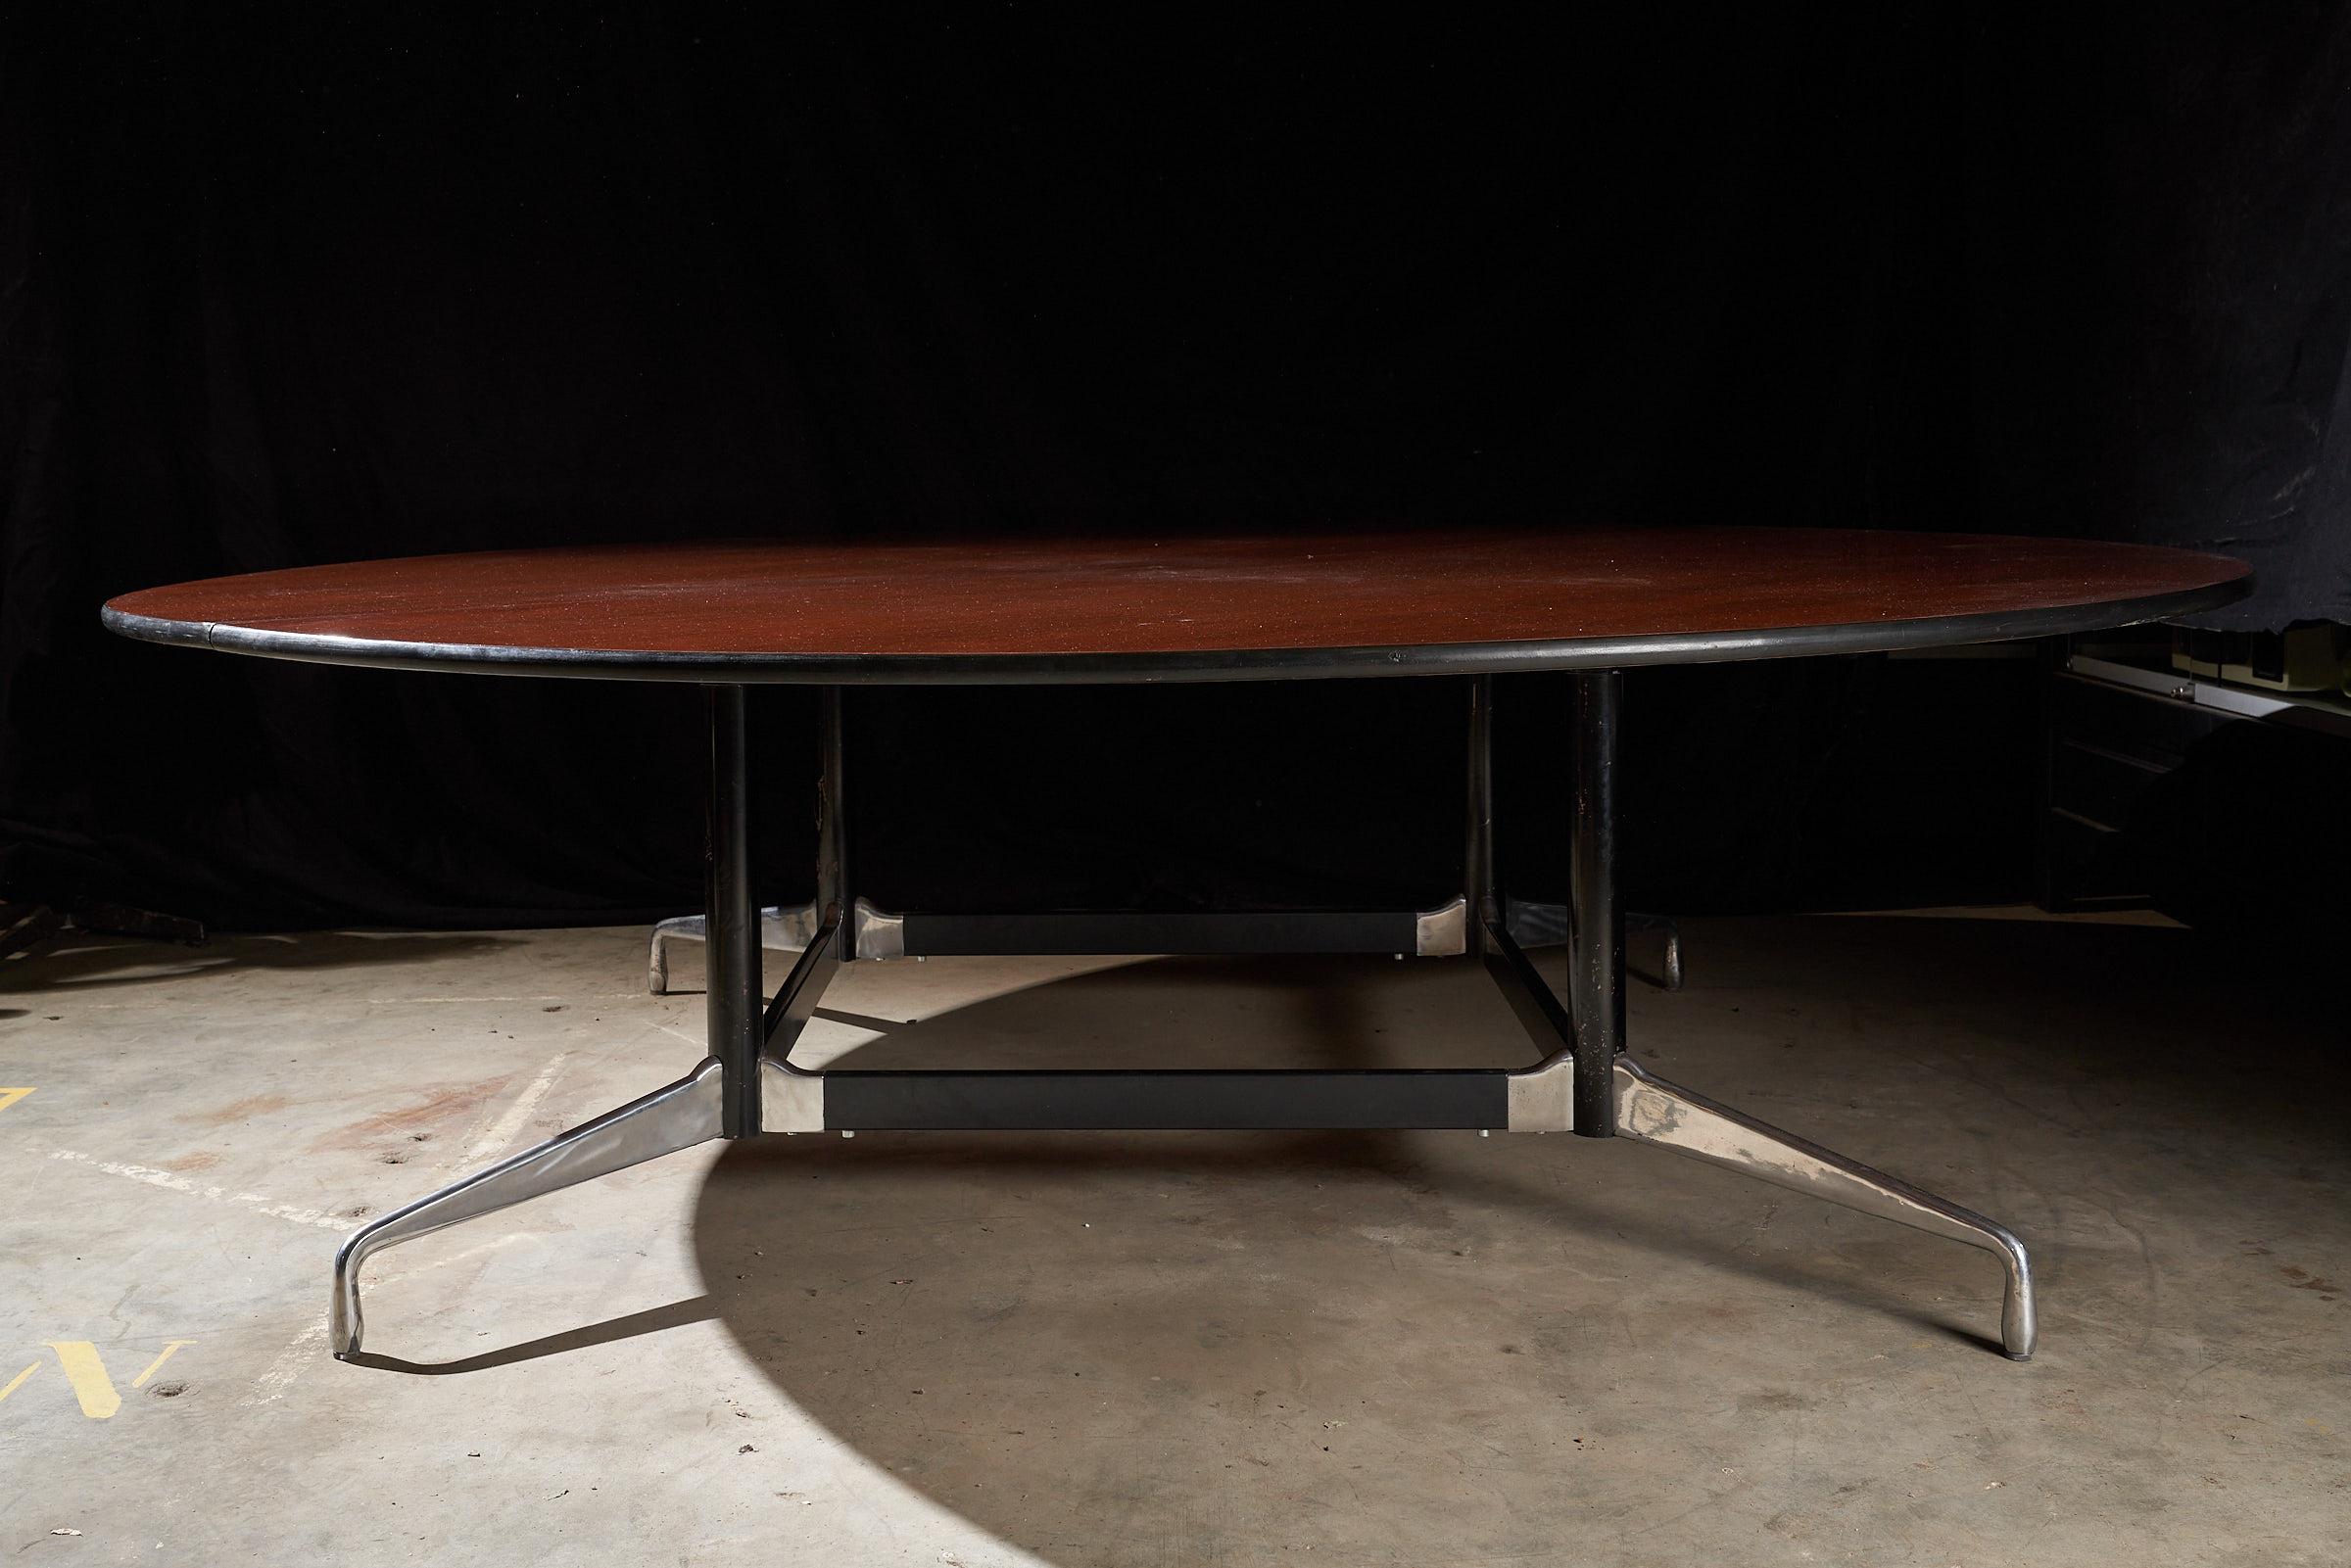 Introducing the large conference table by Herman Miller Eames, a striking centerpiece that commands attention with its impressive size and timeless allure. The wooden tabletop, showcased in the accompanying pictures, boasts impeccable condition,